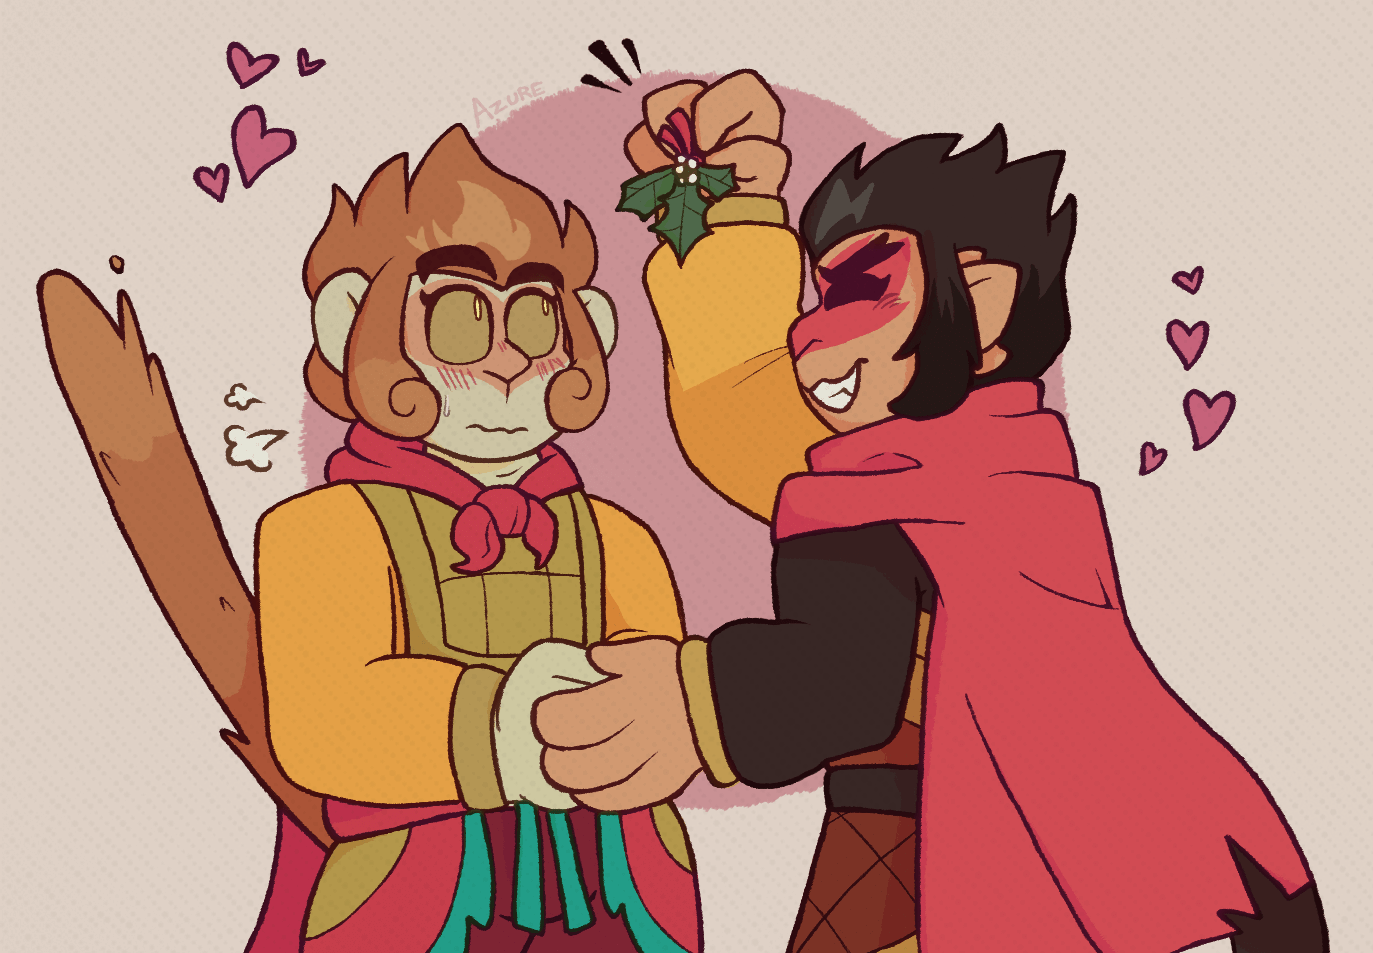 LEGO Monkie Kid fanart of Sun Wukong and Macaque, where Macaque is grinning and holding up a mistletoe above Sun Wukong. Wukong seemingly just noticed this, and is blushing while his tail puffs up in surprise.